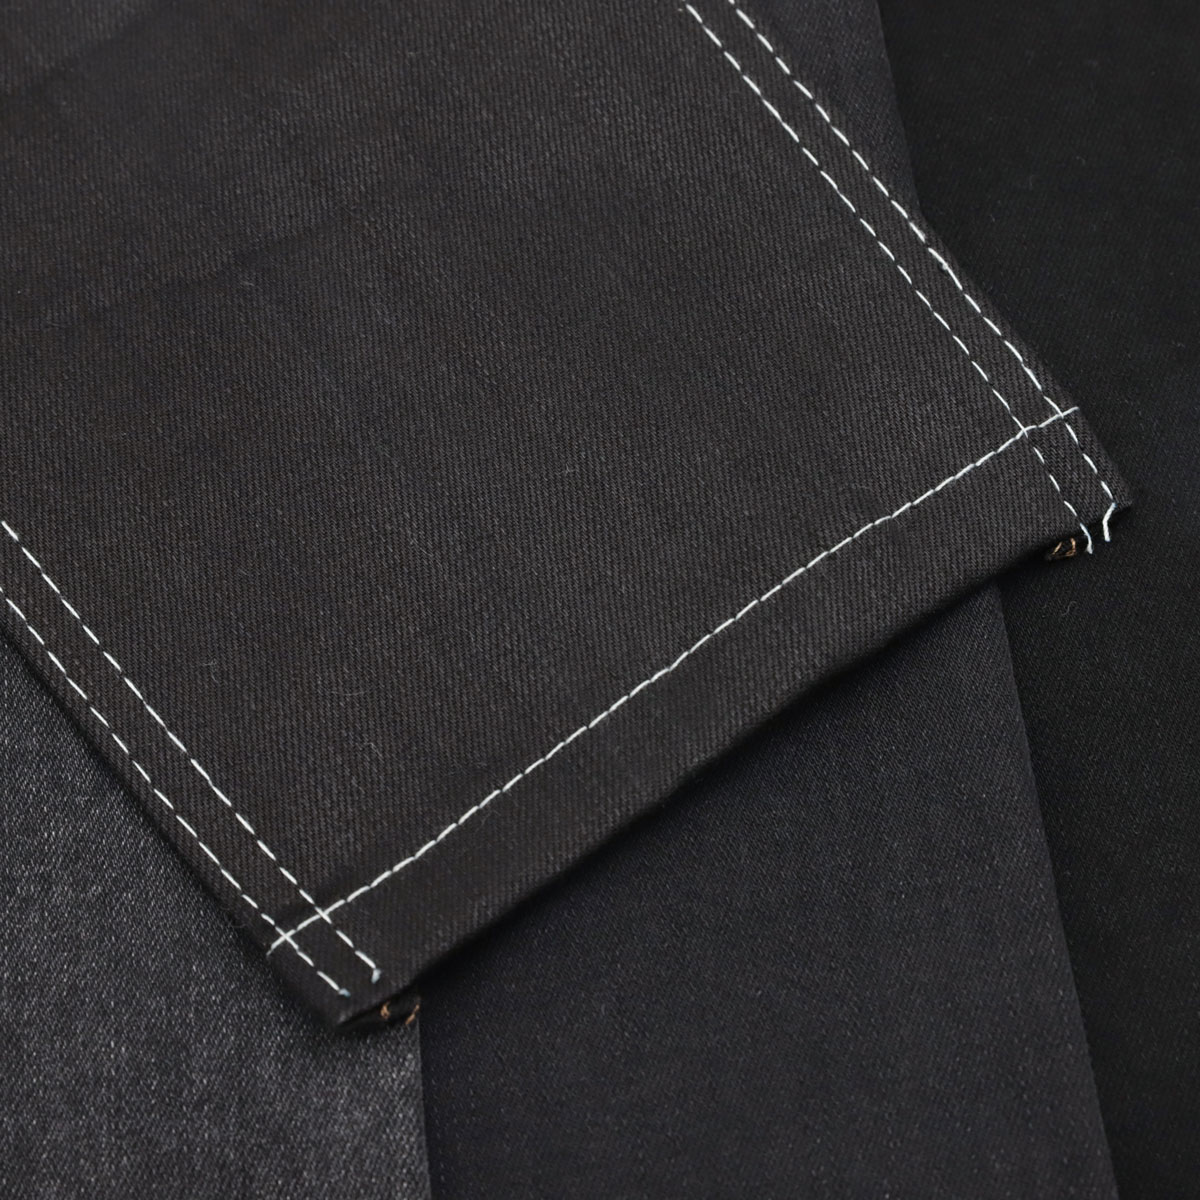 Good Non-stretch Denim Fabric: Tips for Buying Good Non-stretch Denim Fabric 1